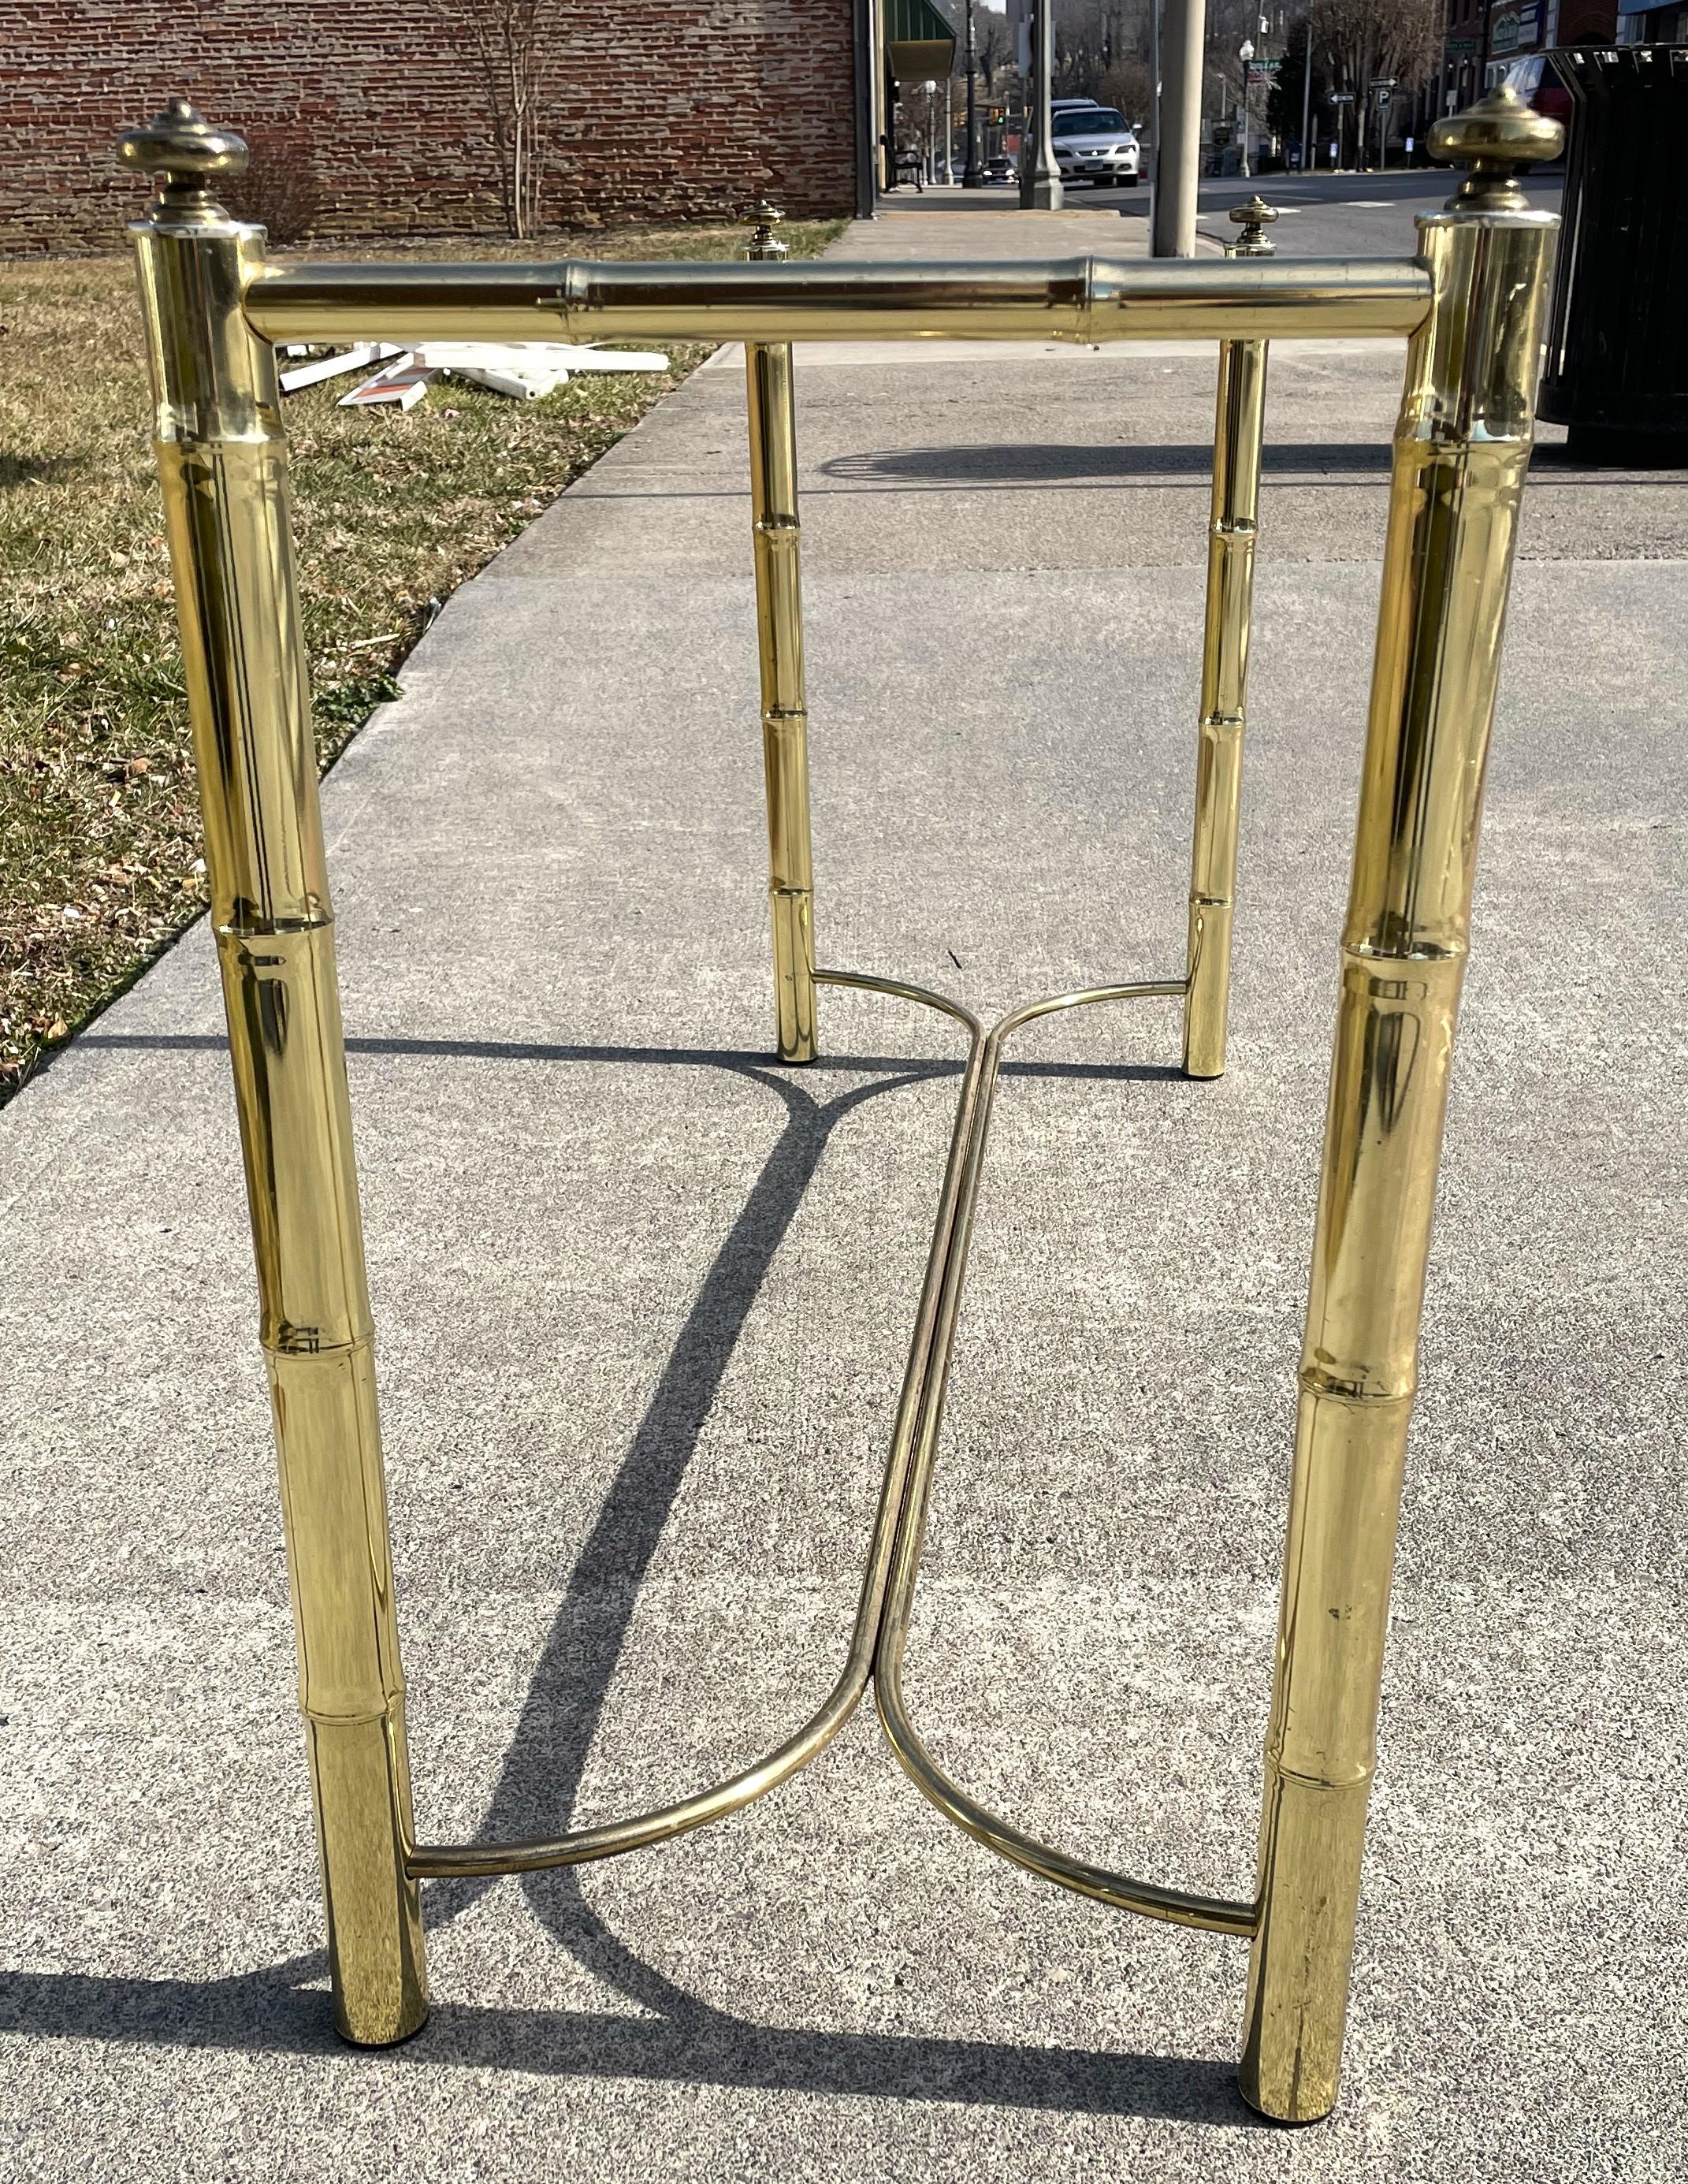 Here is a decorative brass plated, faux bamboo style metal console table with a smoked glass top. The glass could possibly be a replacement since it is not as long as the space it is set in, the glass measures 46 inches by 14 inches and the space is